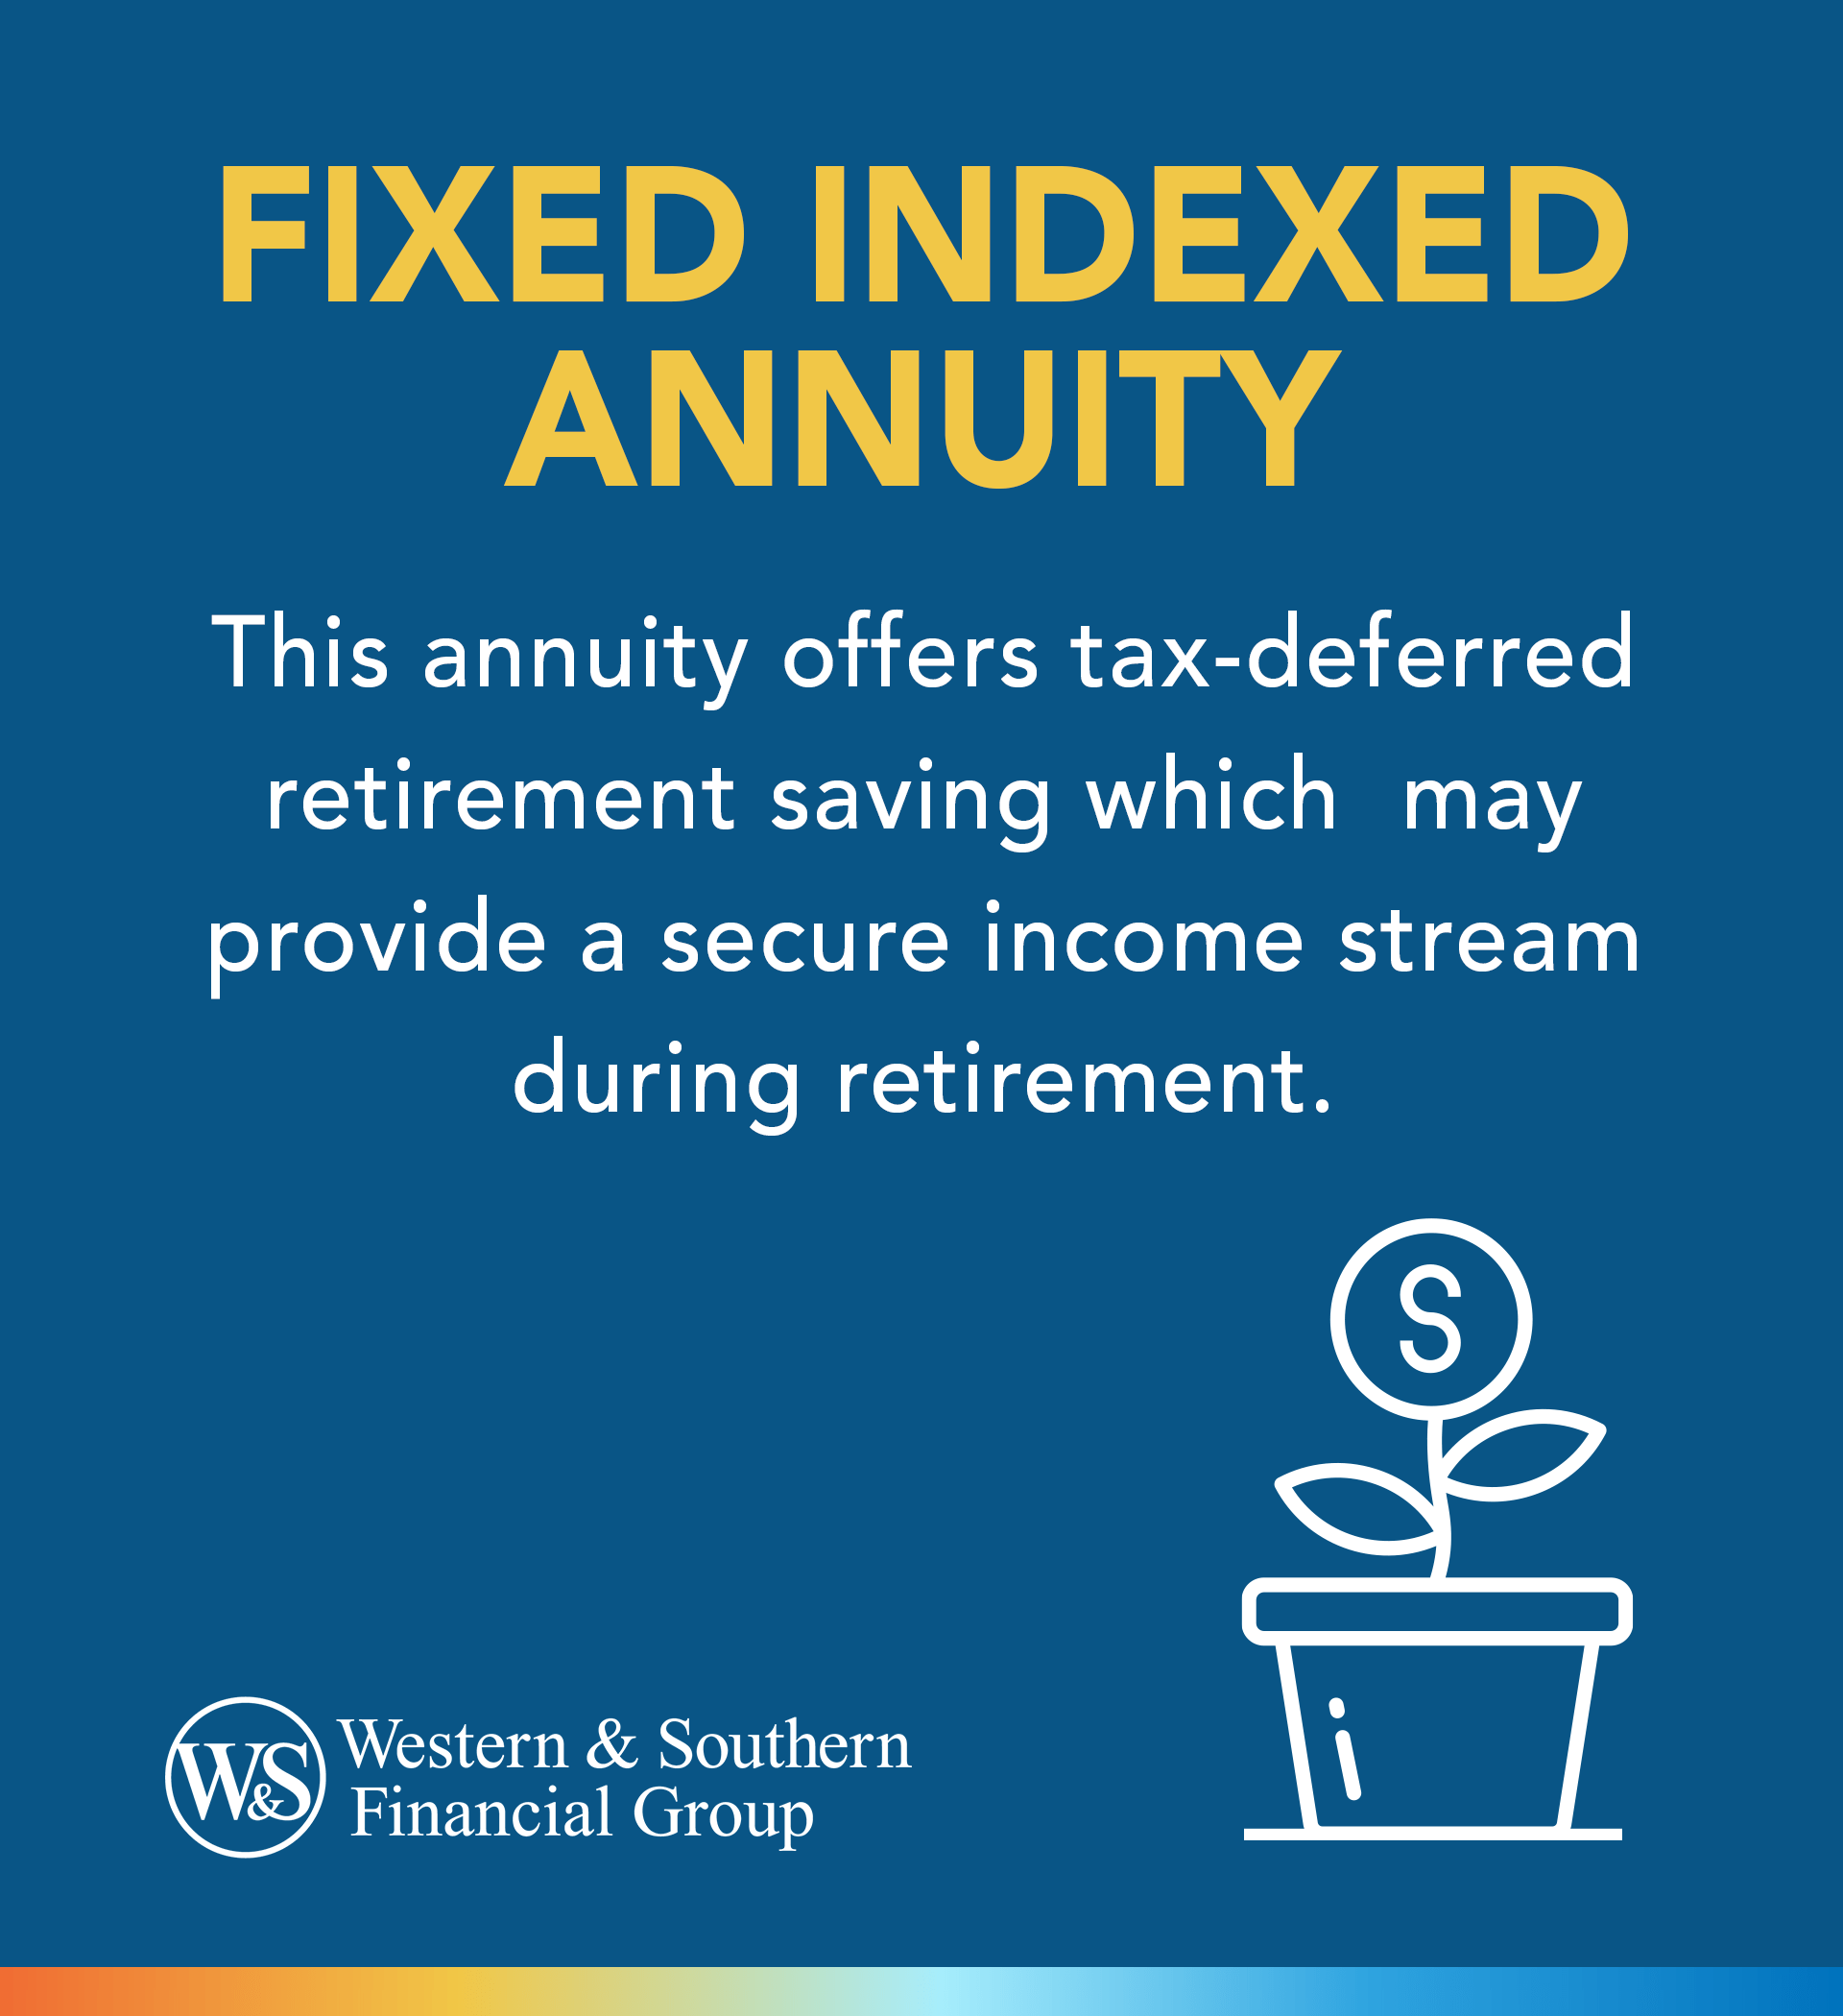 Fixed Indexed Annuity definition